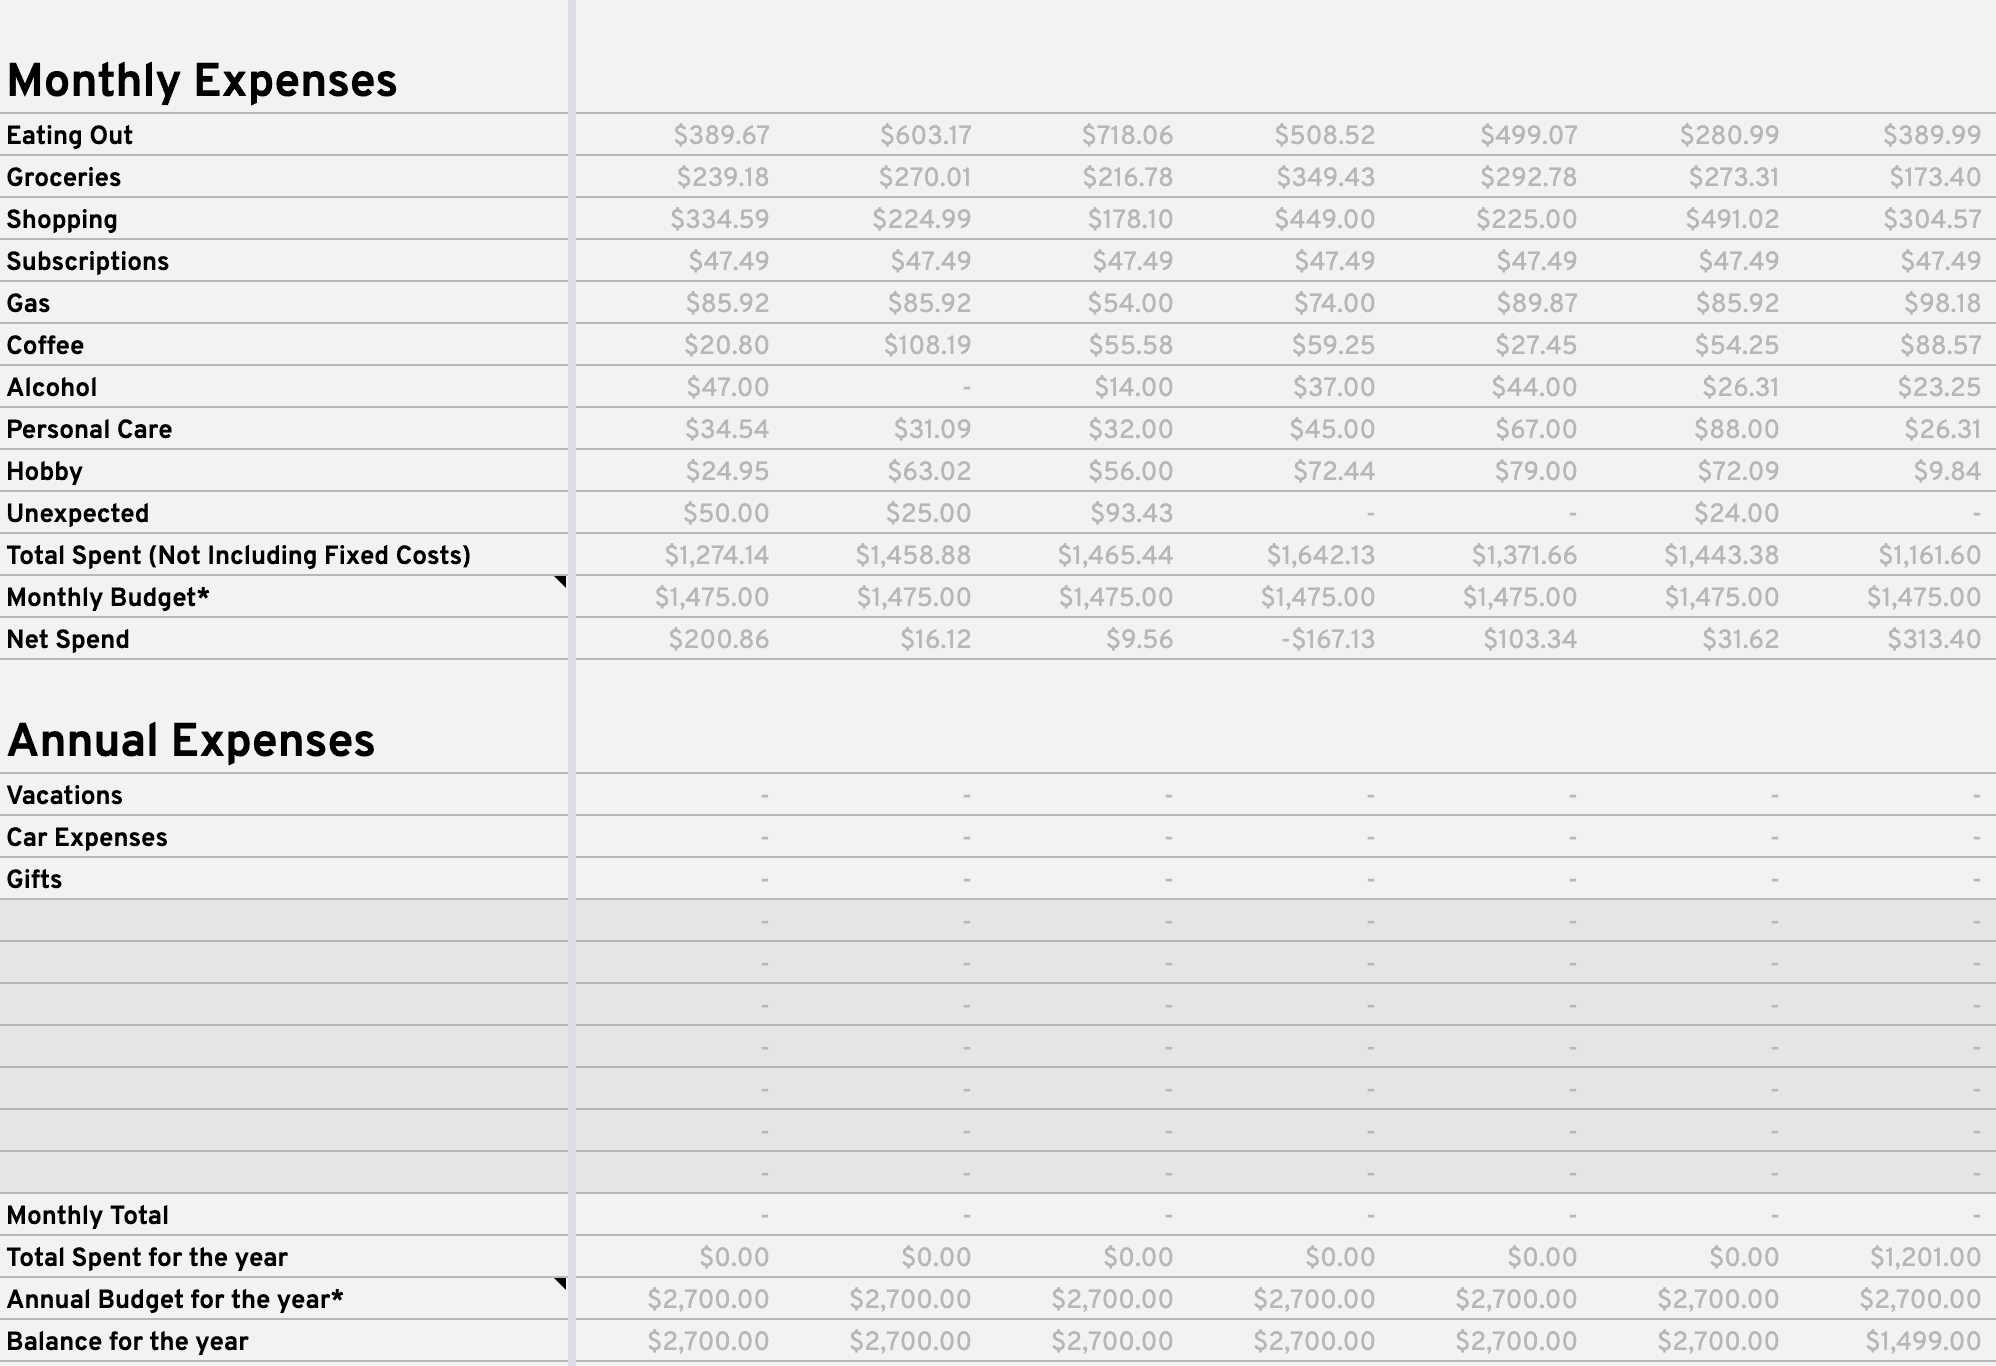 Example of the Monthly and Annual Expenses secions with sample data on the Balance Sheet tab.